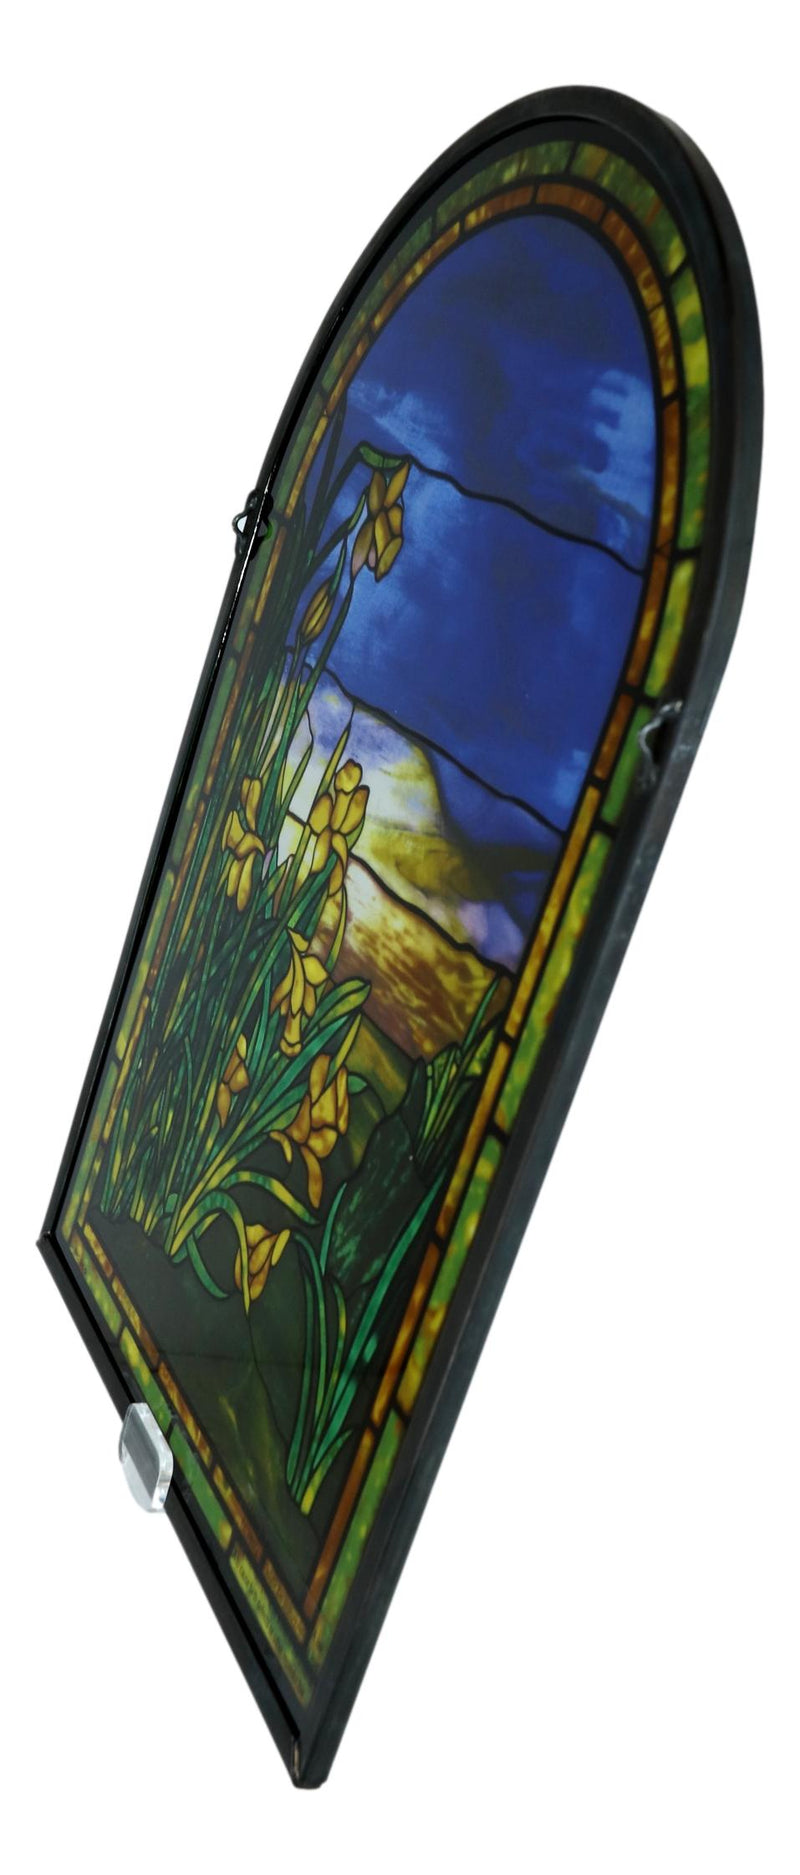 Tiffany View of Oyster Bay Glass Panel, 13 x 12 - Detroit